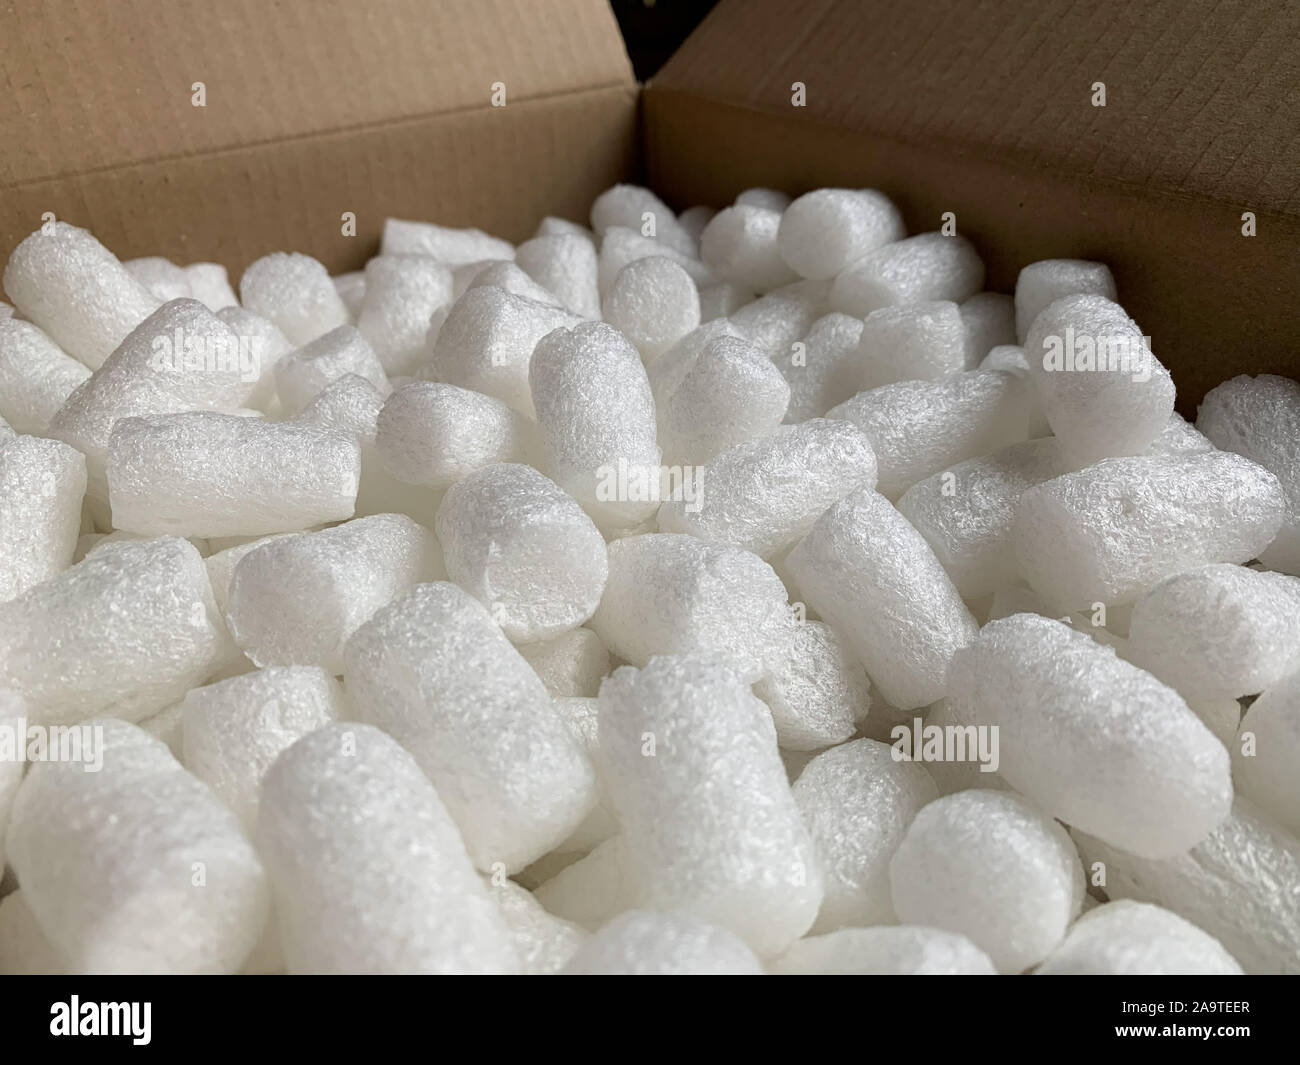 White polystyrene plastic foam elements within a parcel, to secure a safe transport. Stock Photo